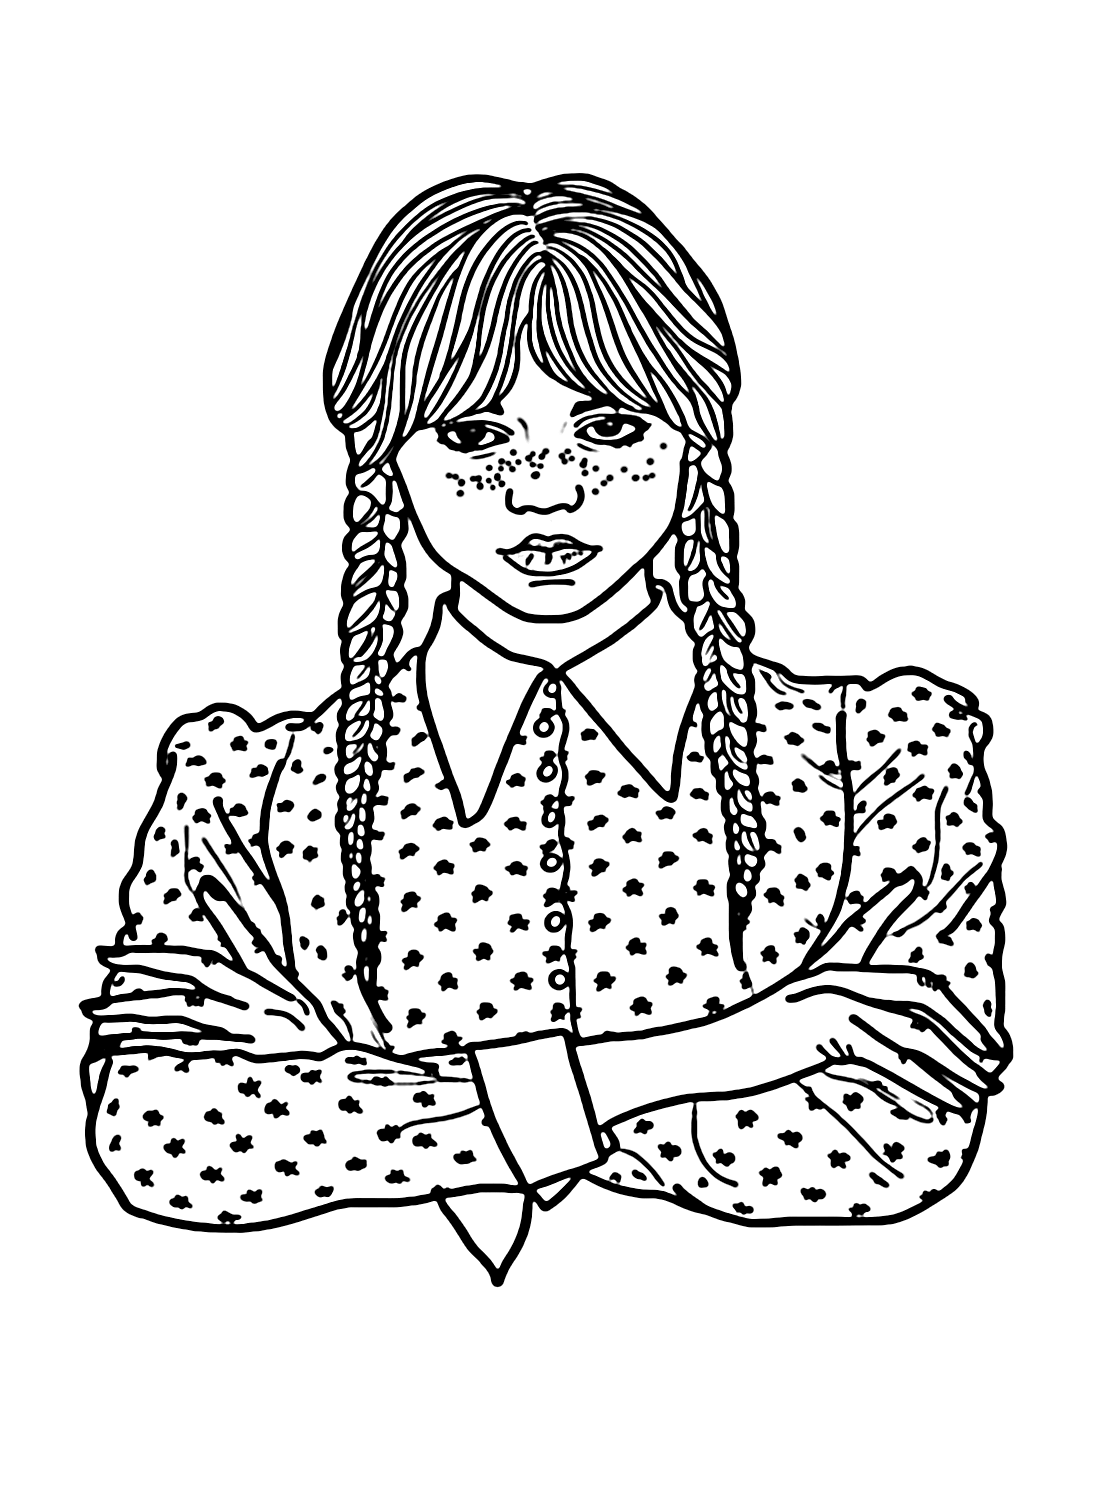 Jenna Ortega as Wednesday Addams Coloring Pages - Wednesday Coloring Pages  - Coloring Pages For Kids And Adults